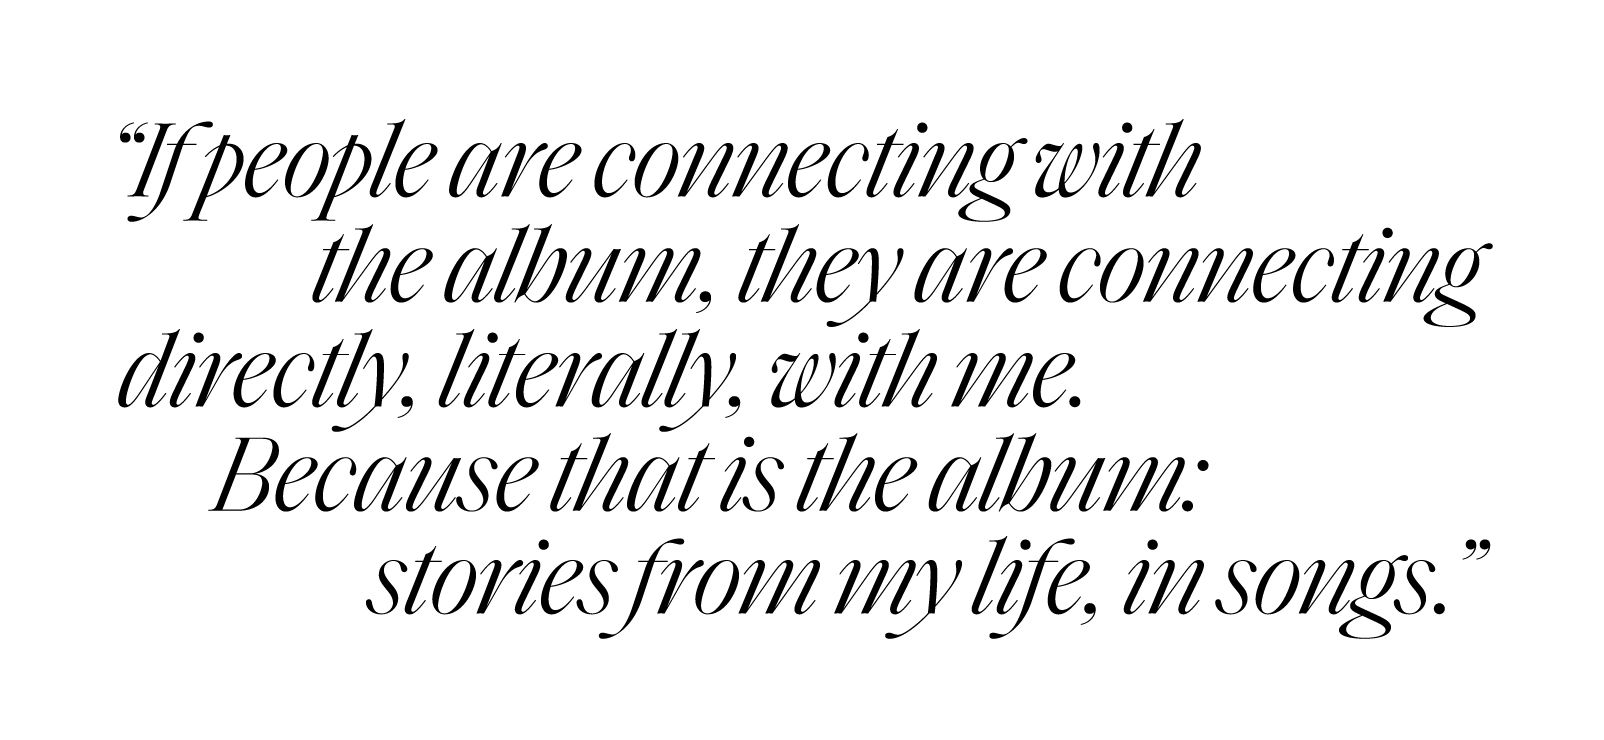 if people are connecting with the album, they are connecting directly, literally, with me because that is the album stories from my life, in songs